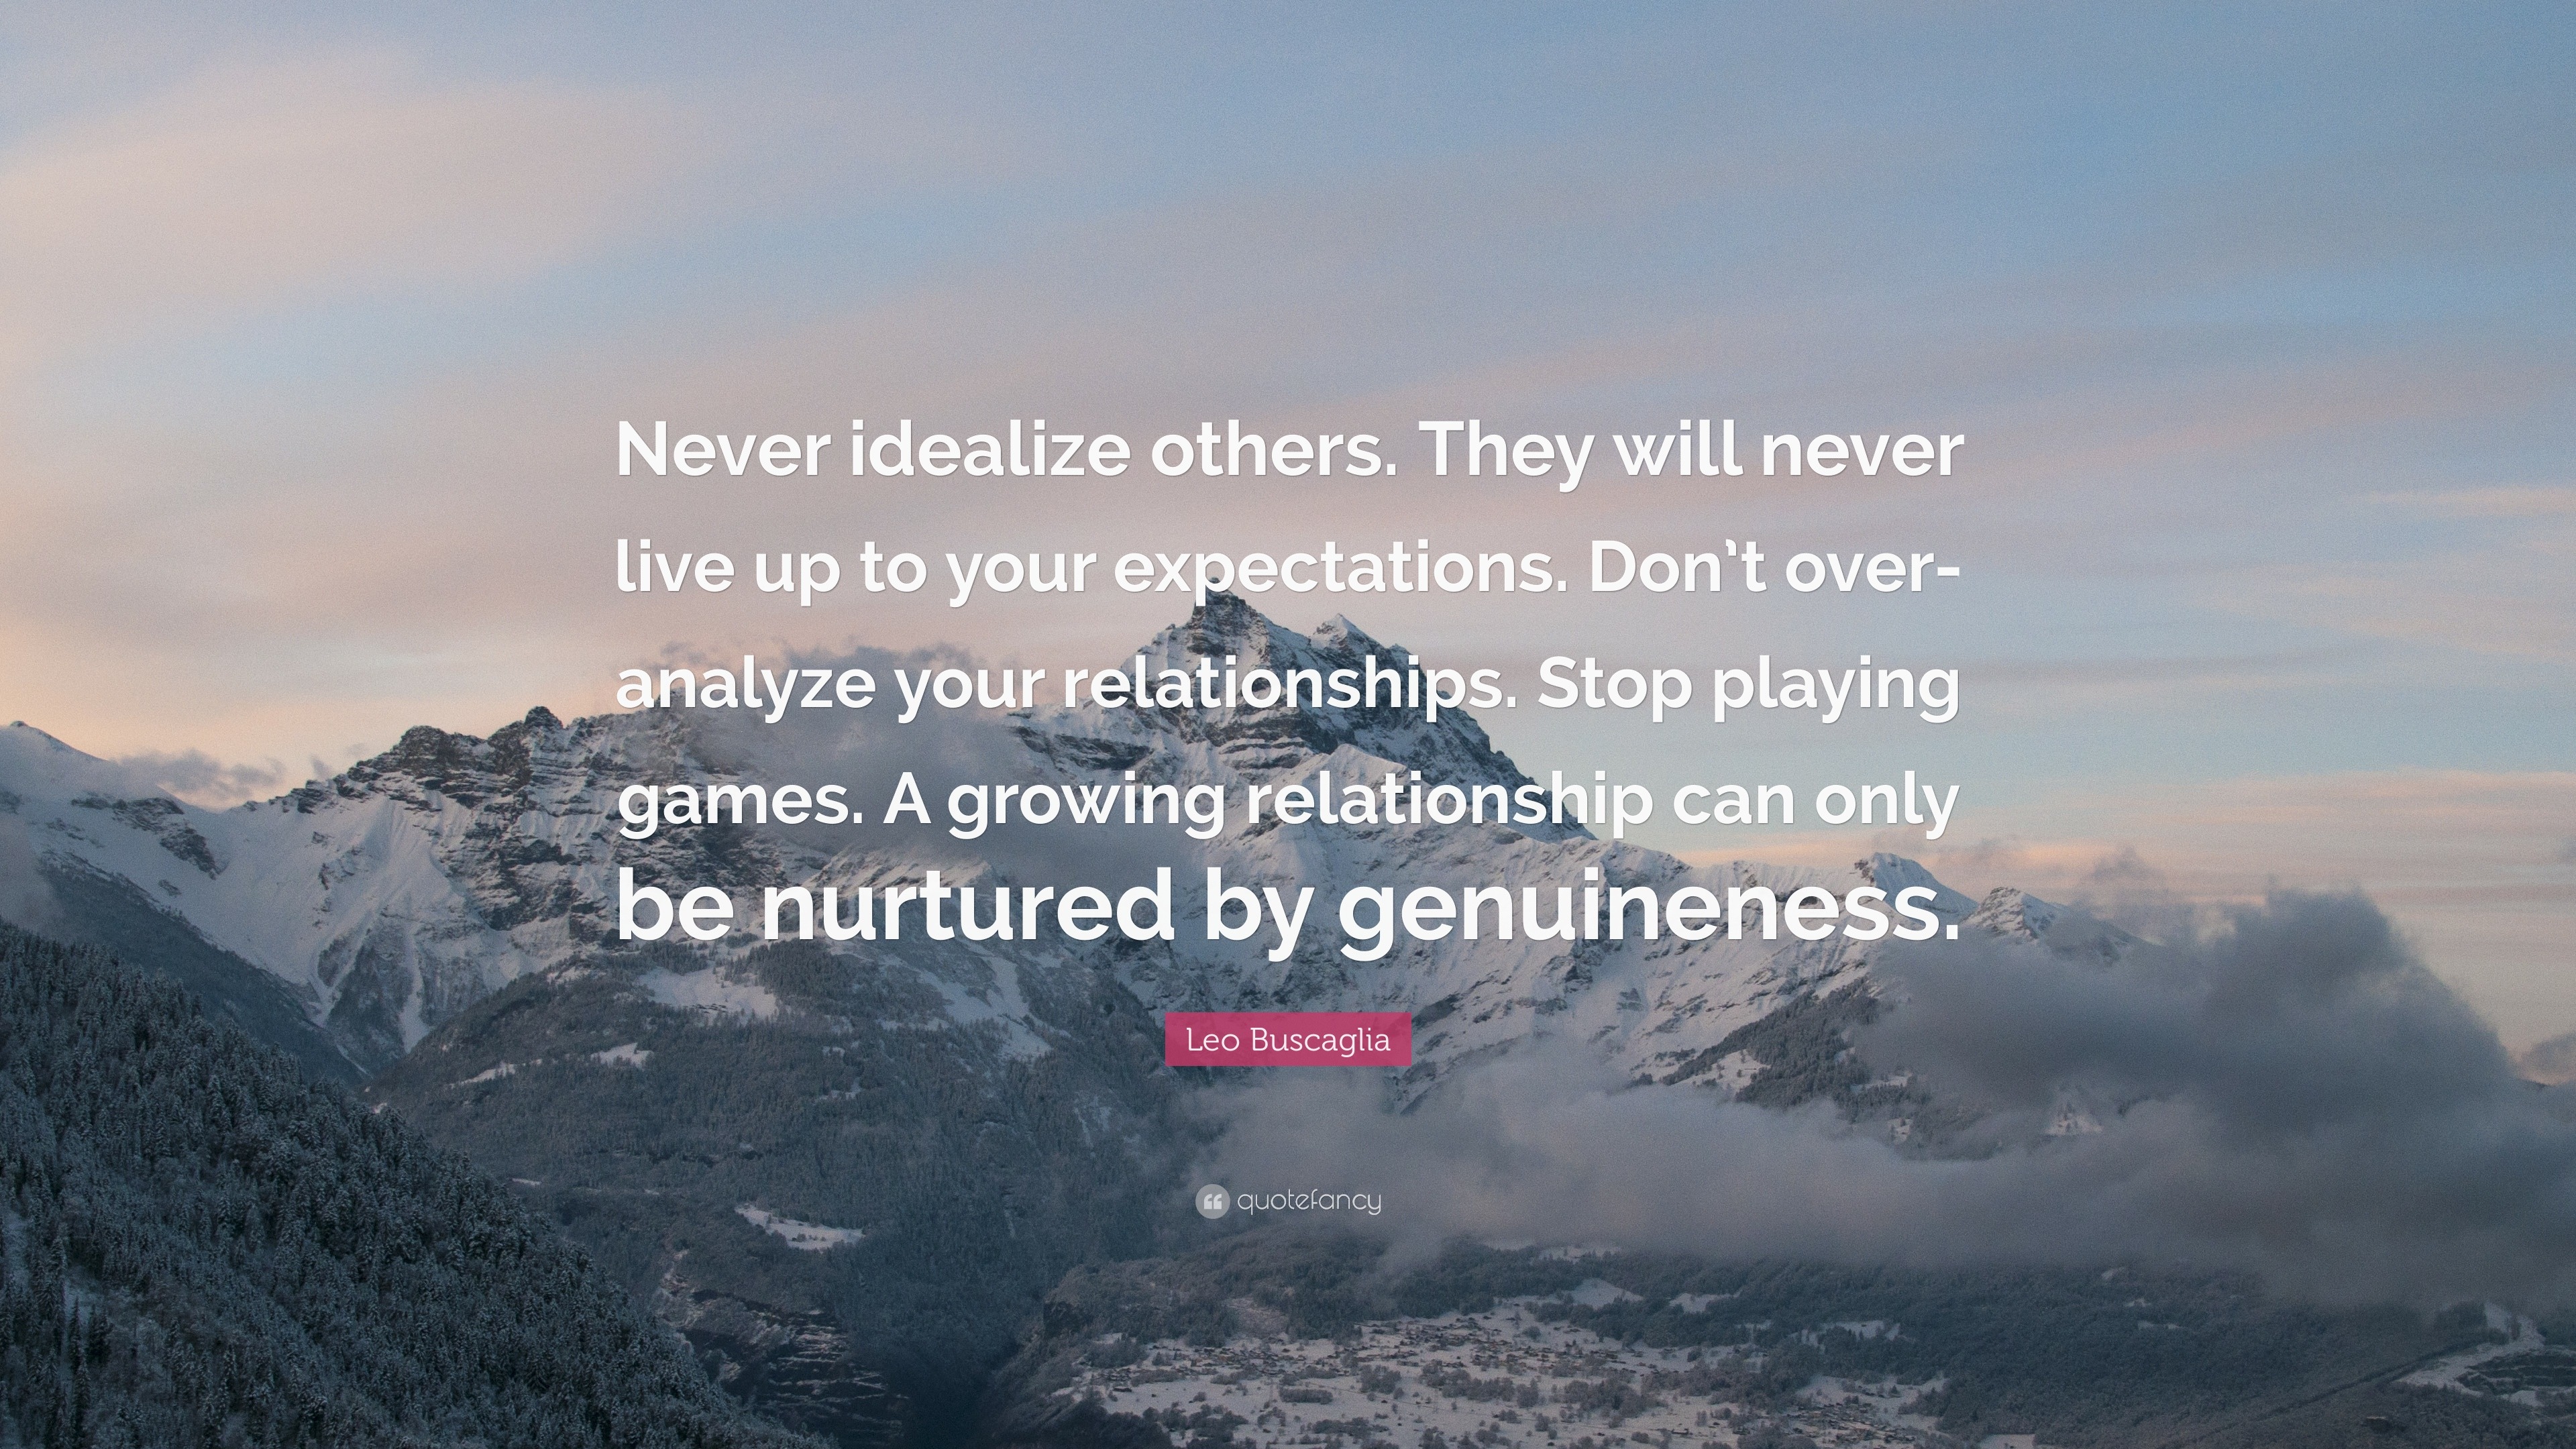 Leo Buscaglia Quote: “Never idealize others. They will never live up to ...